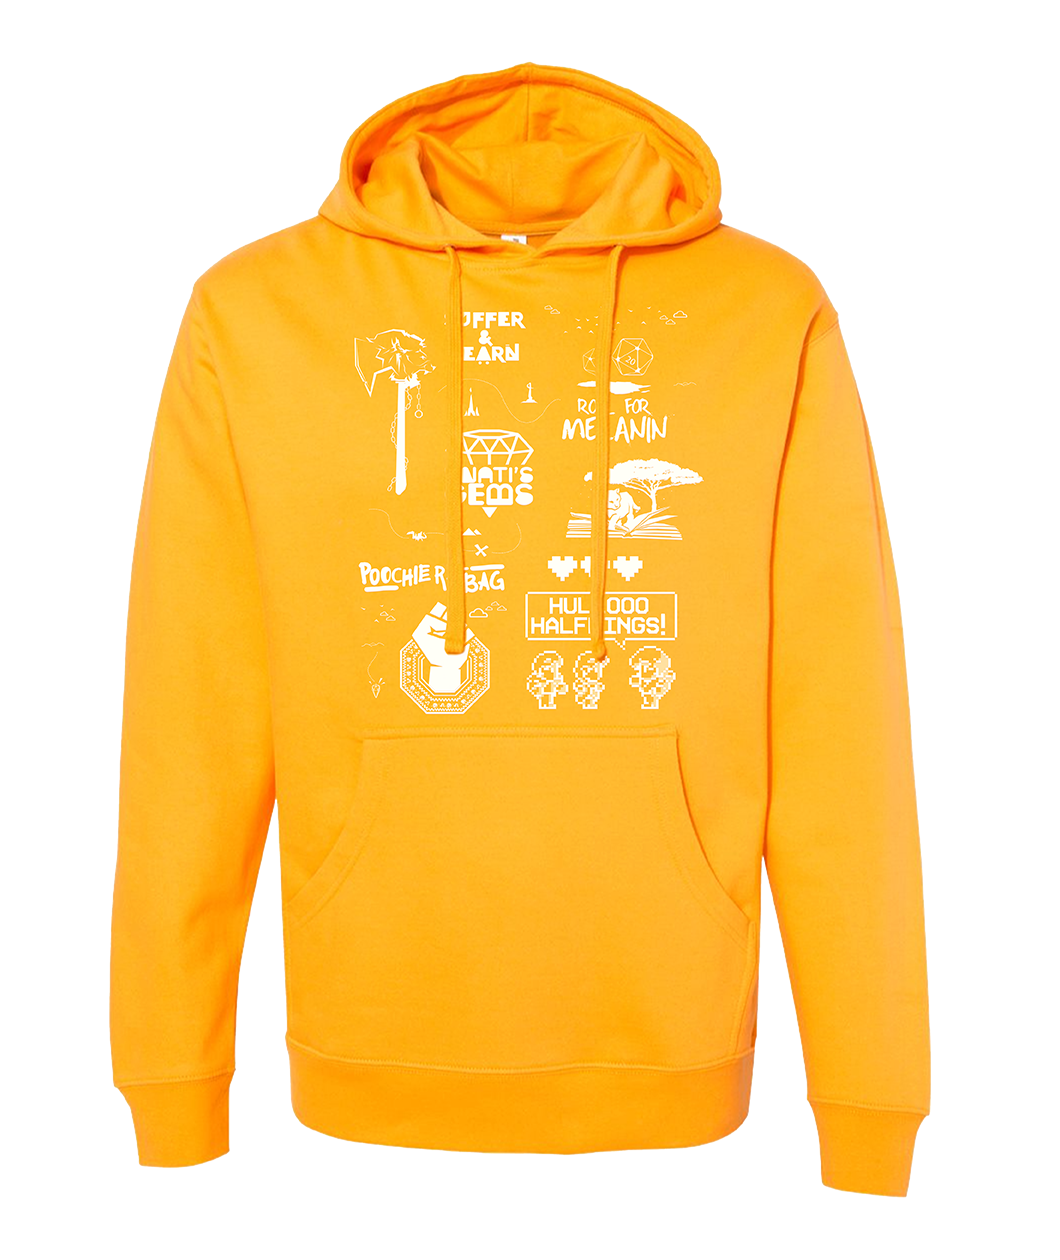 Yellow hoodie with various Three Black Halflings designs in white on the front of the hoodie. 